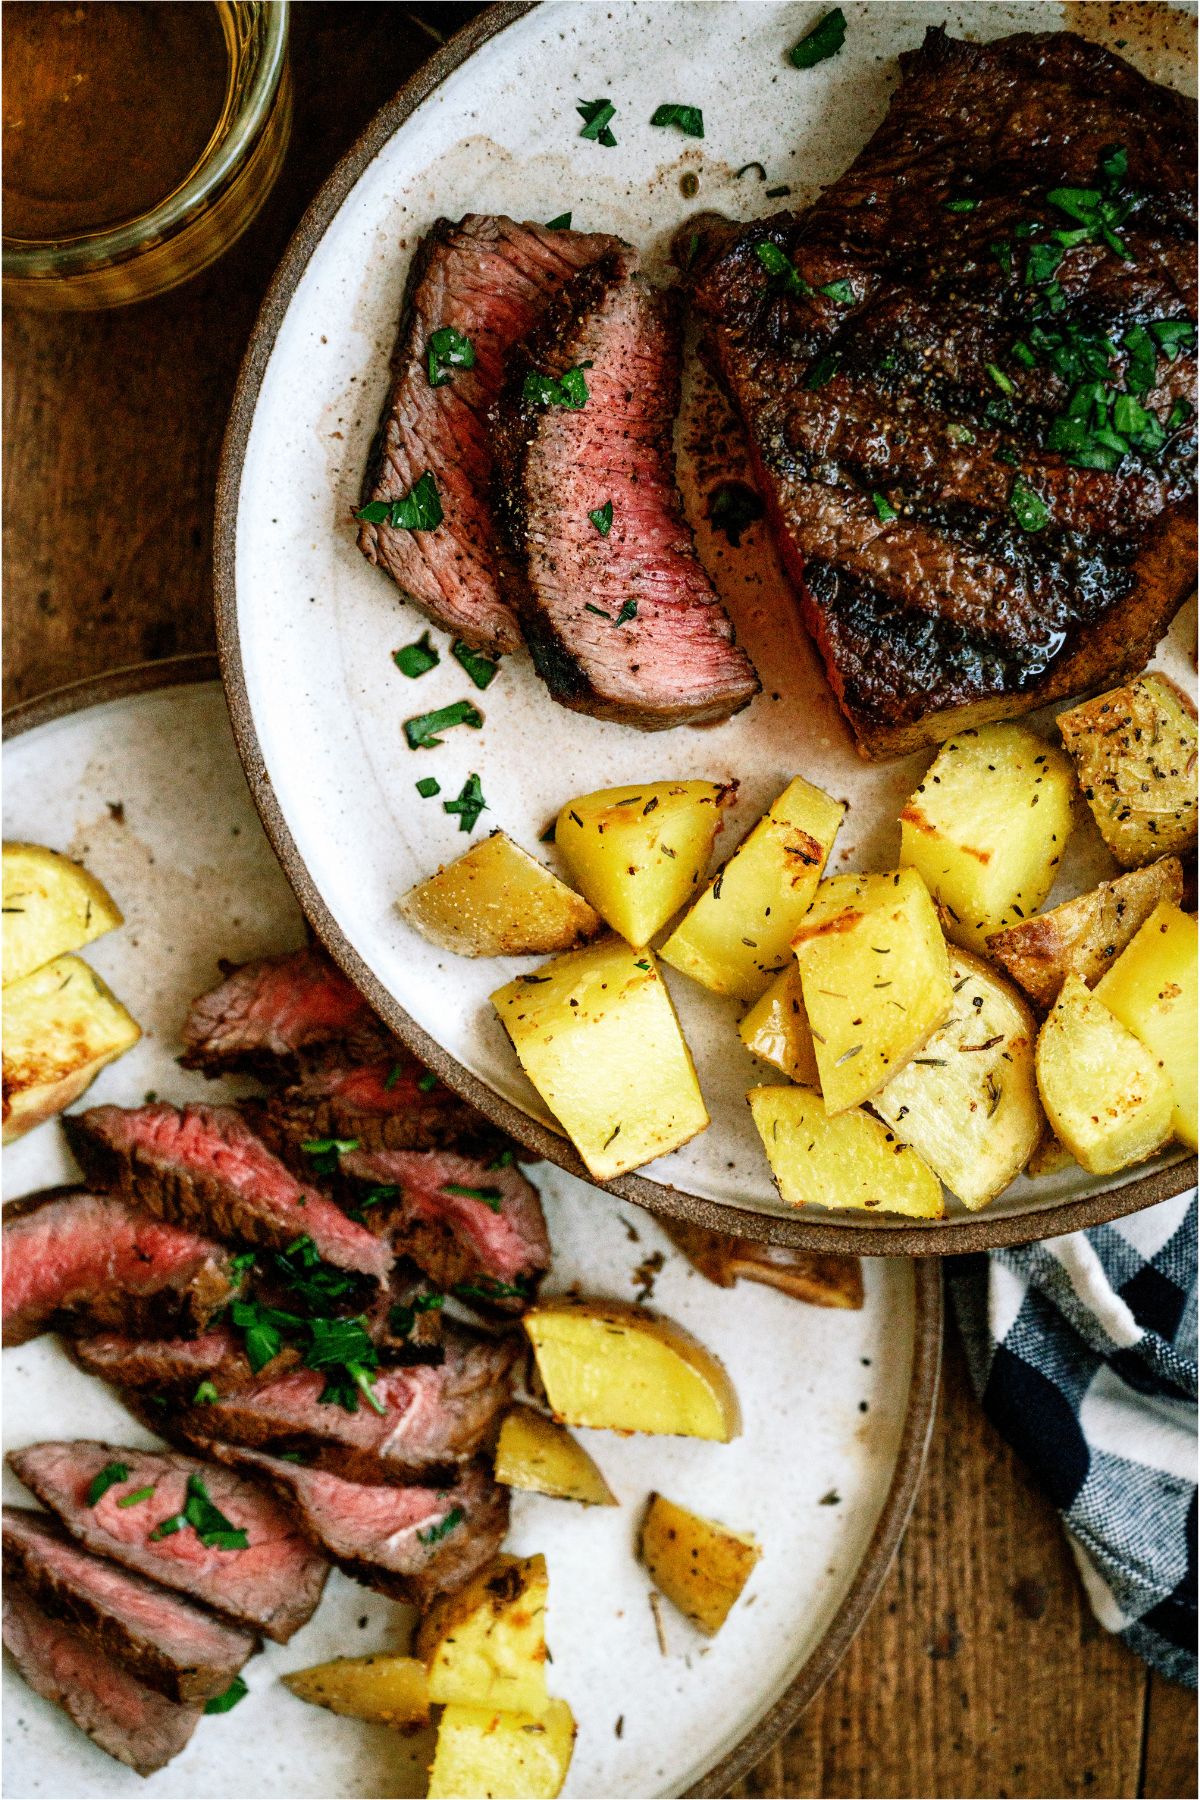 2 plates with sliced steak and potatoes